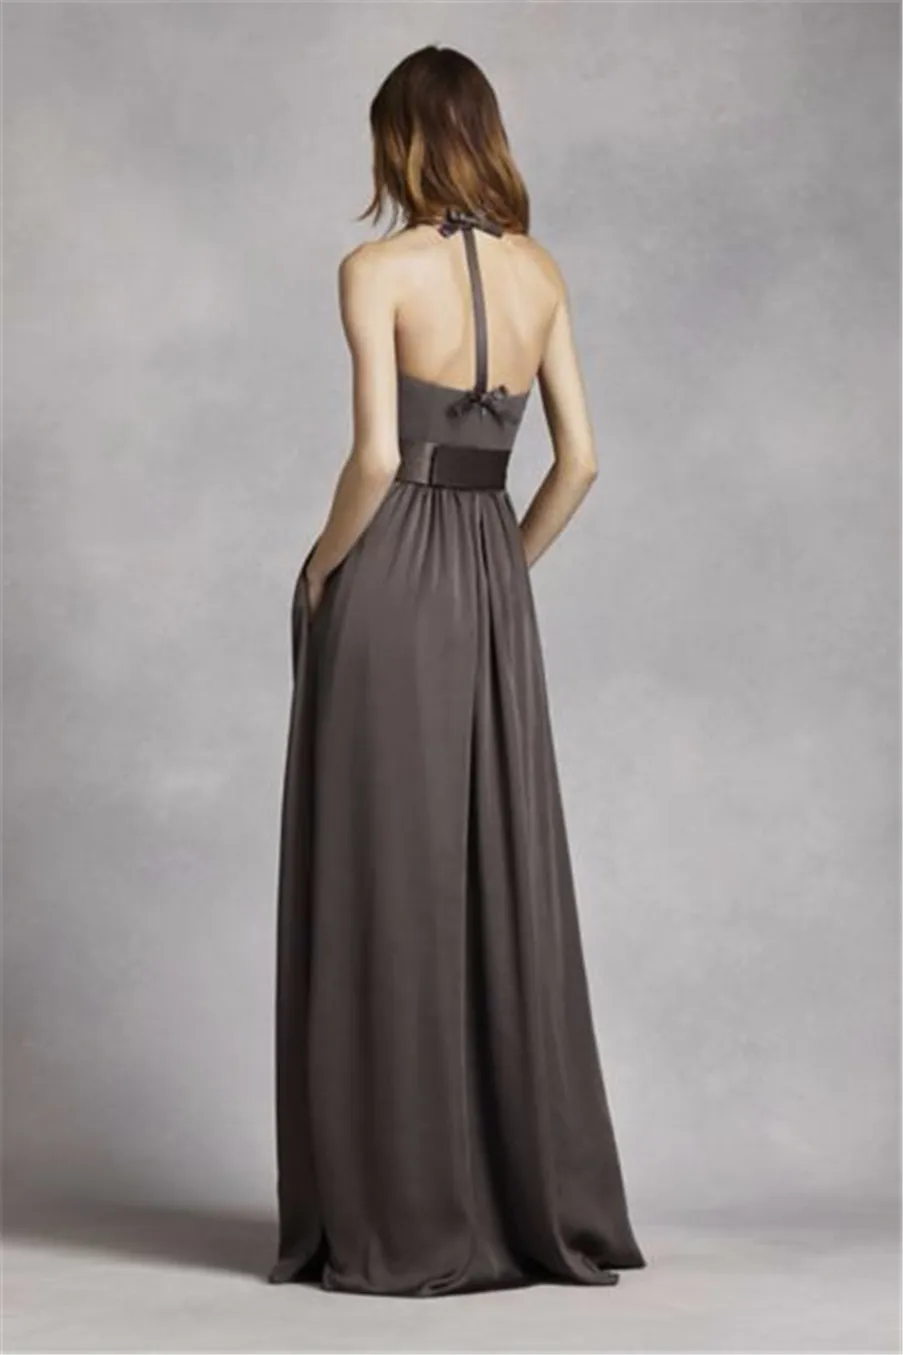 V Neck Halter Neckline Chiffon Front Slit Bridesmaid Dress VW360214 with Sash Wedding Party or Any Special Event7735638